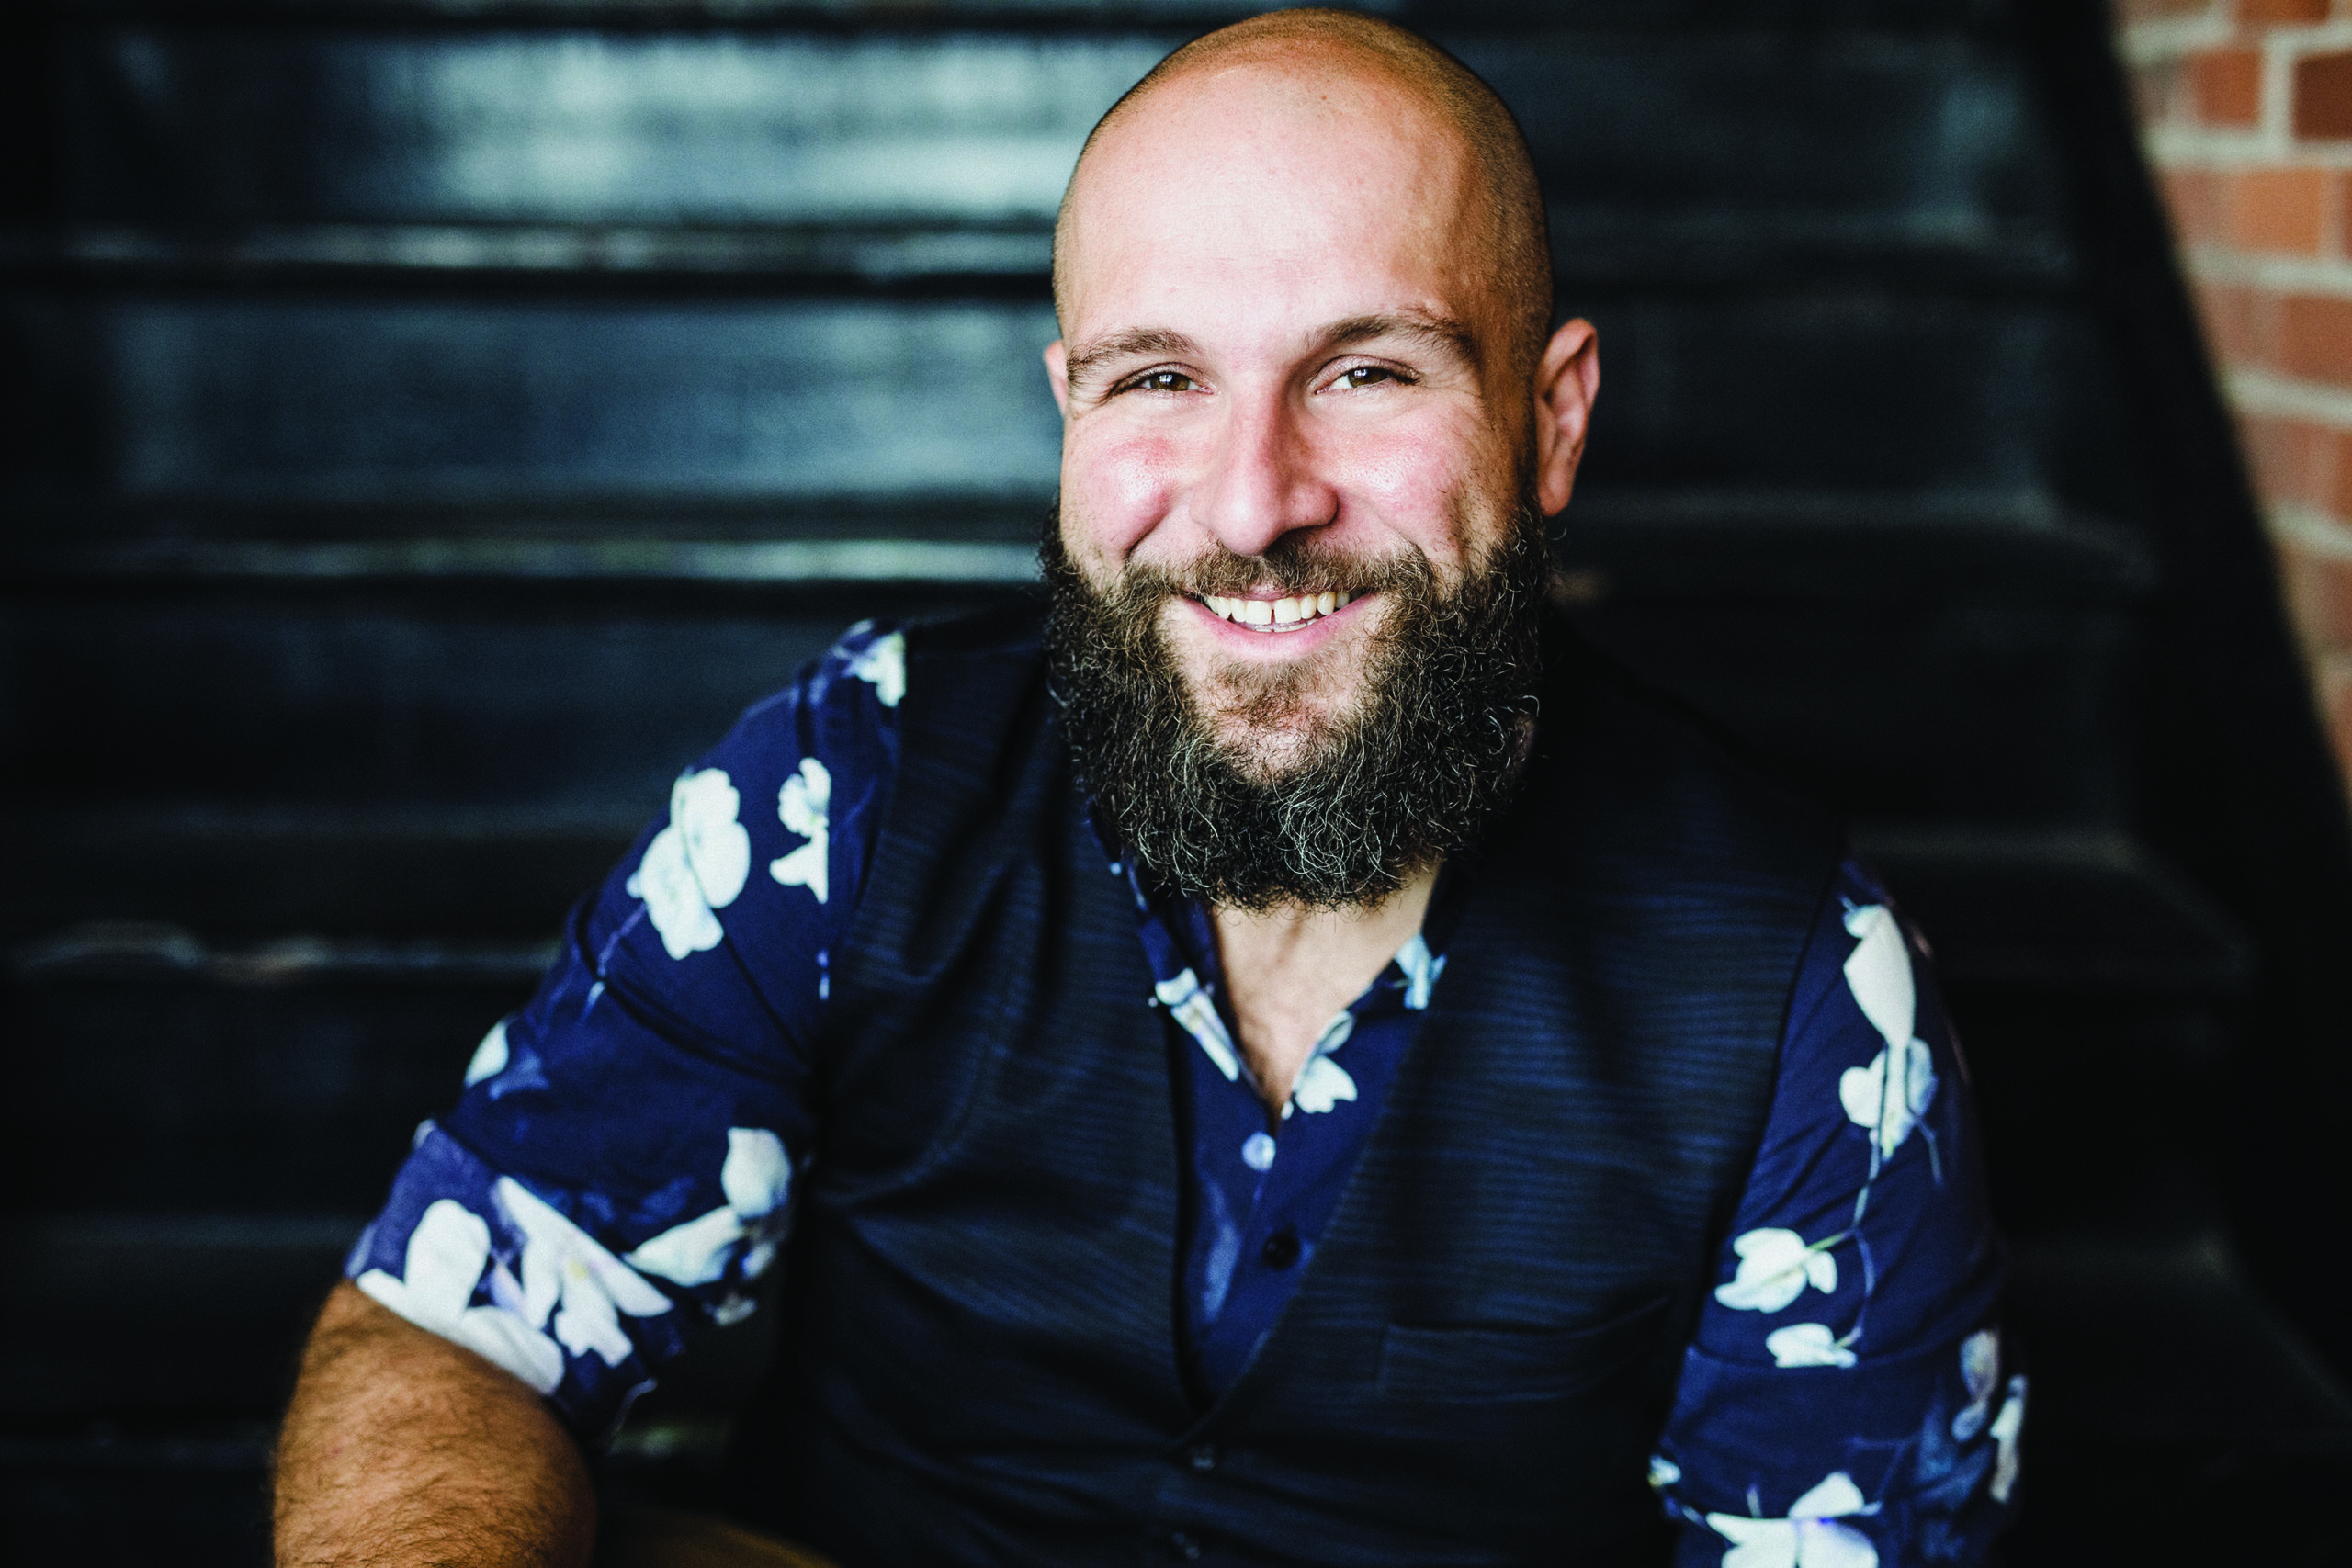 Smiling face of Jacques Arsenault with beard, wearing a blue floral shirt